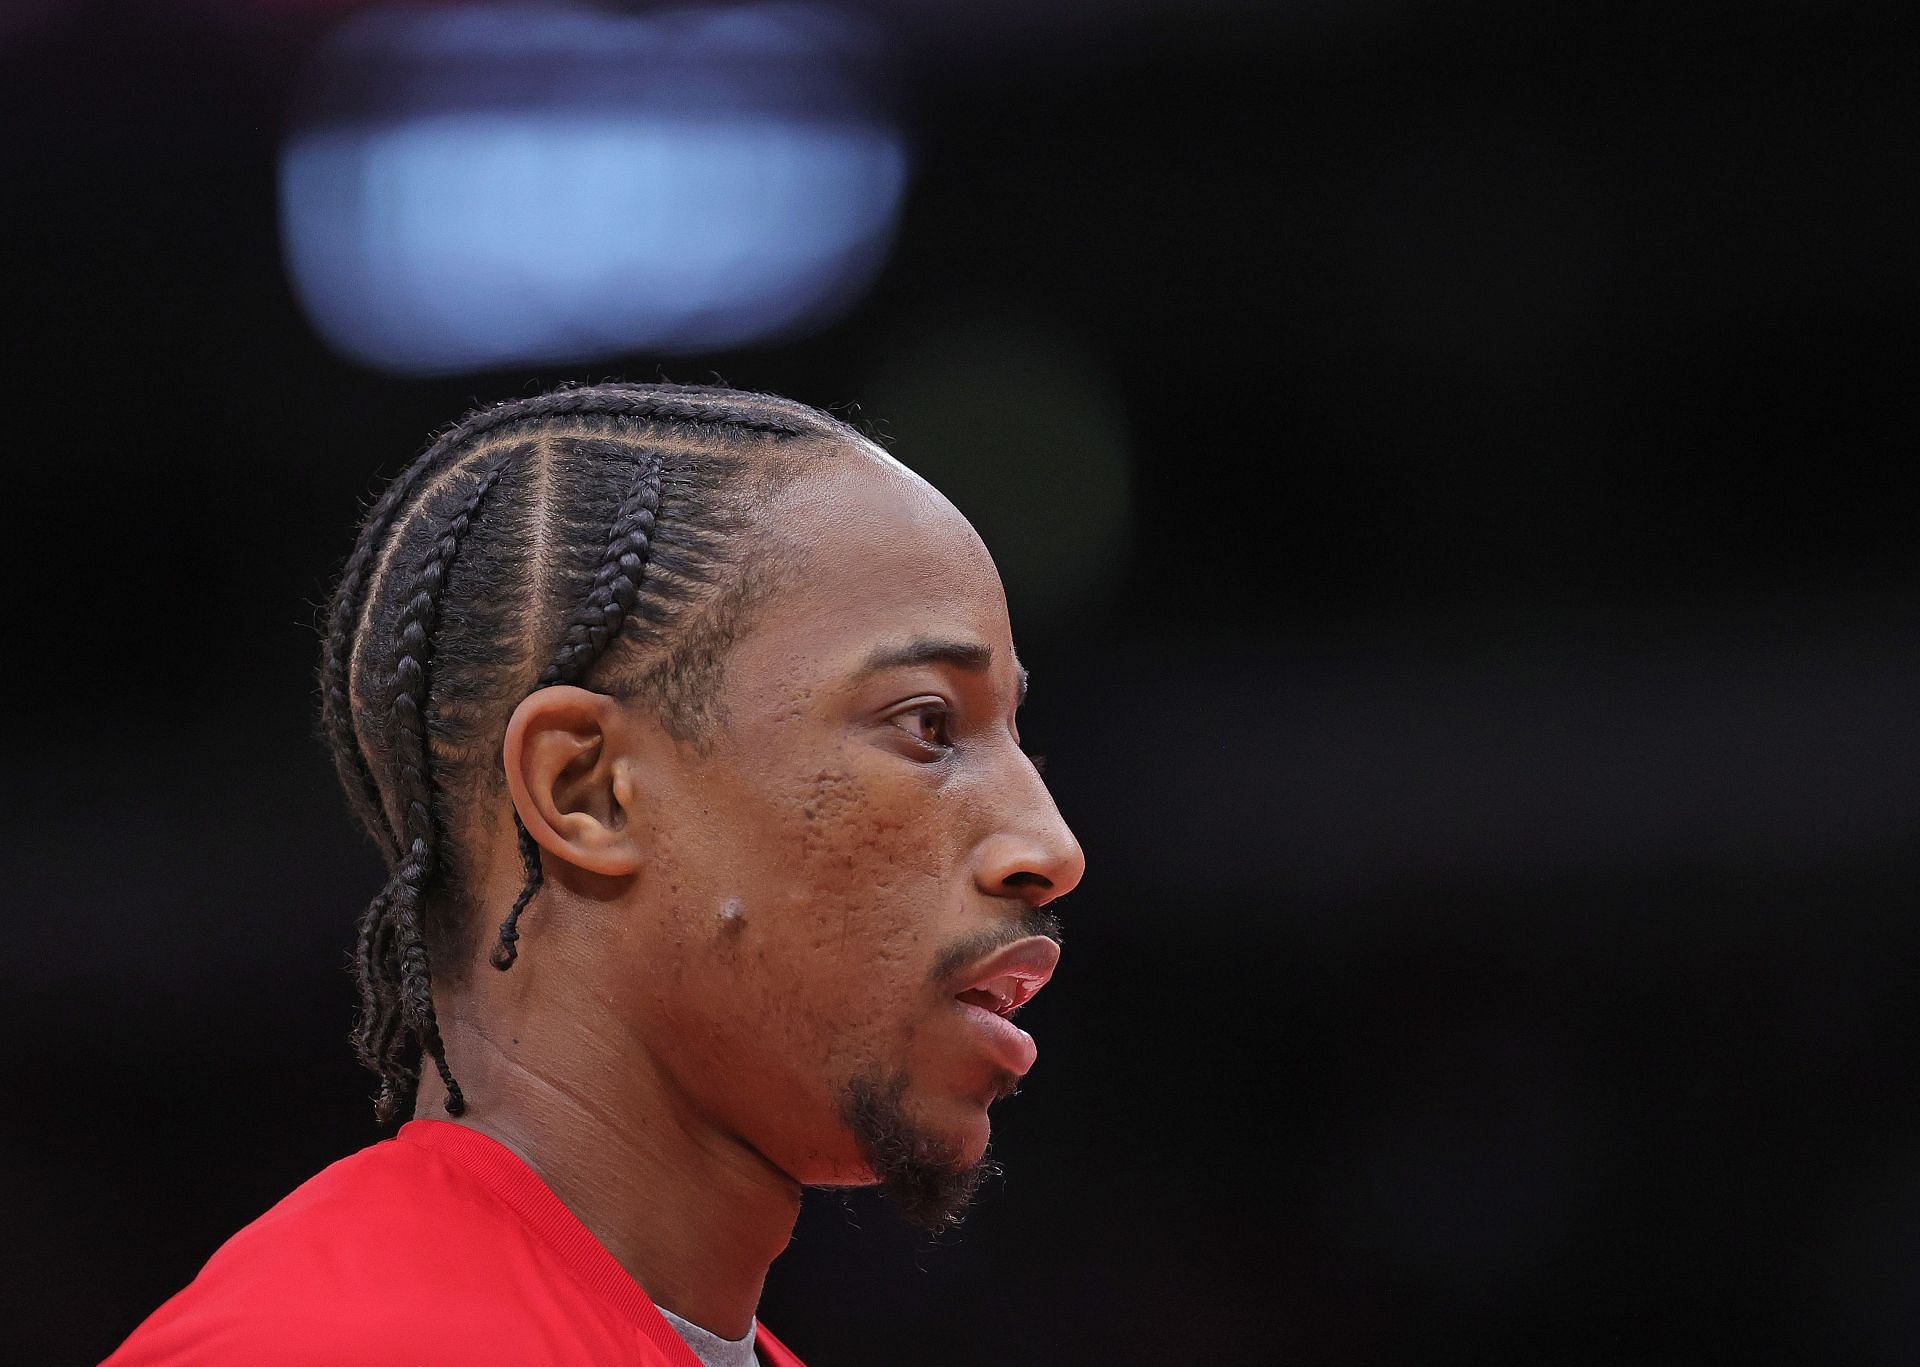 DeMar DeRozan of the Chicago Bulls is seen during warmups before a game against the New Orleans Pelicans at the United Center on Oct. 22, 2021, in Chicago, Illinois.